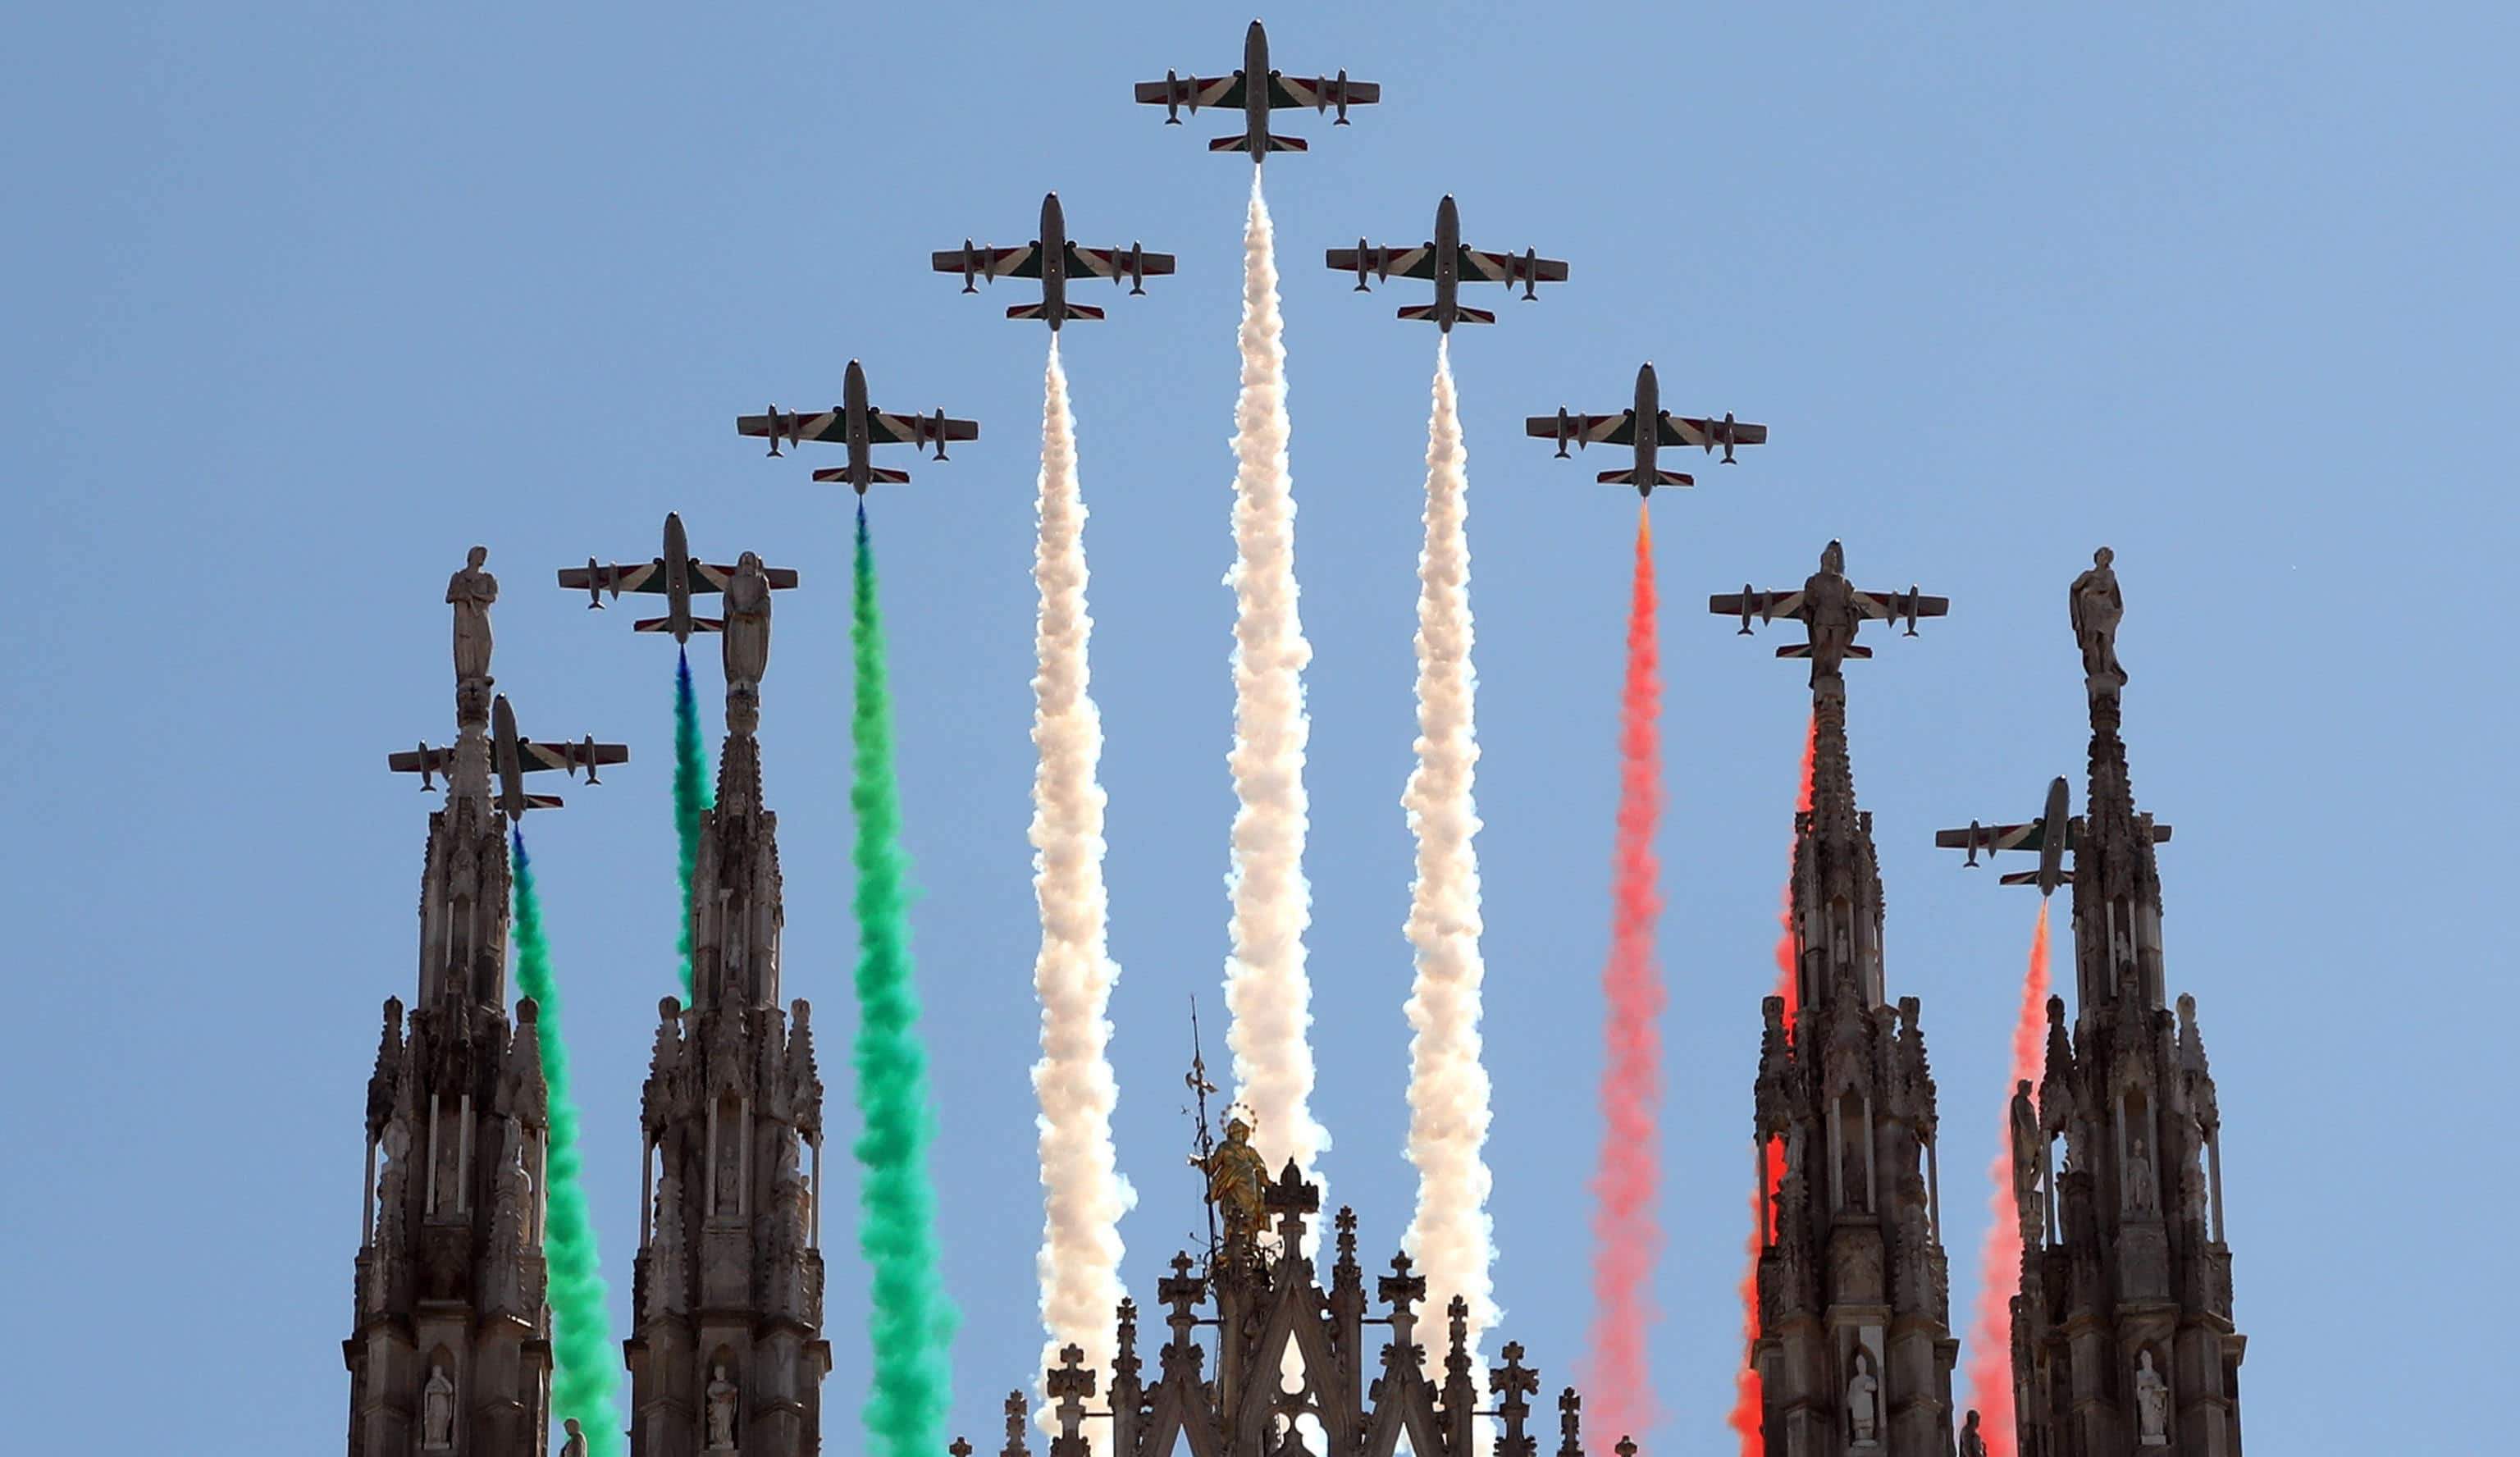 Italian Air Forces aerobatic demonstration team, the Frecce Tricolori, as they fly over the cathedral in Milan, Italy, 25 May 2020. From today the Frecce Tricolori will draw it every day in the Italian sky, flying over all the regions. It will be a big hug to the Italians which will close in Rome on June 2nd for the Republic Day.
ANSA/MATTEO BAZZI